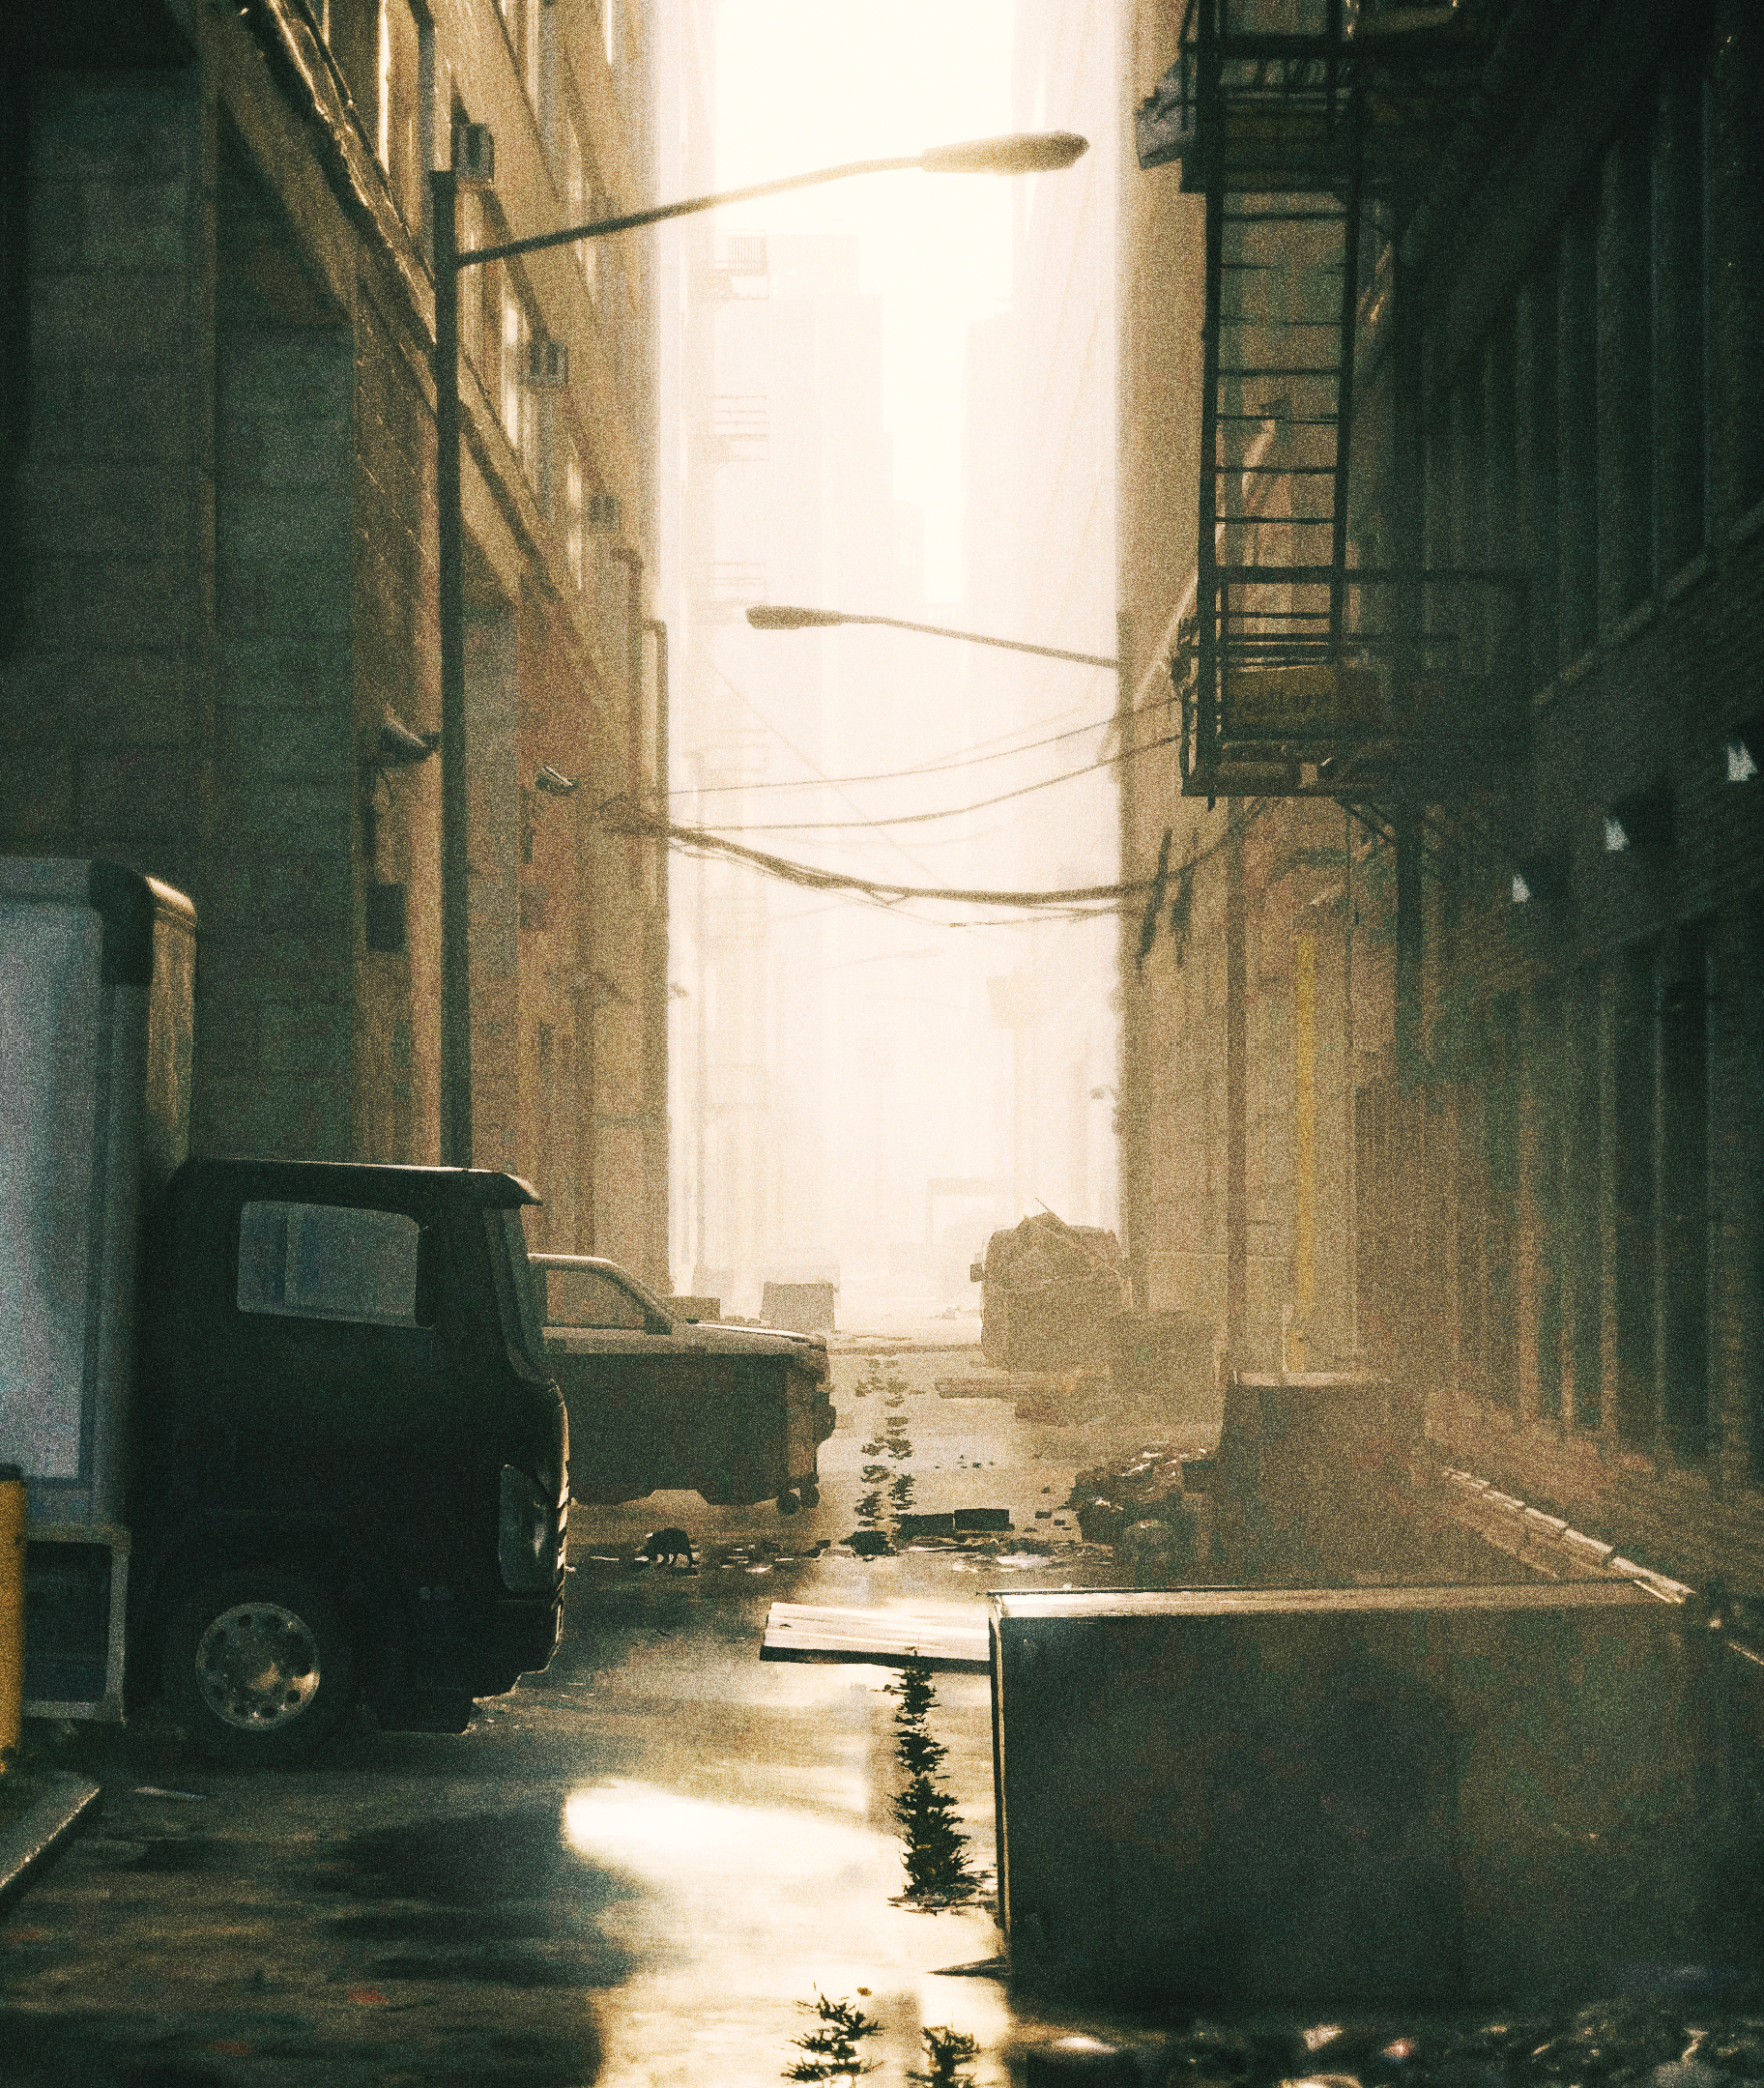 Morning in the back alley